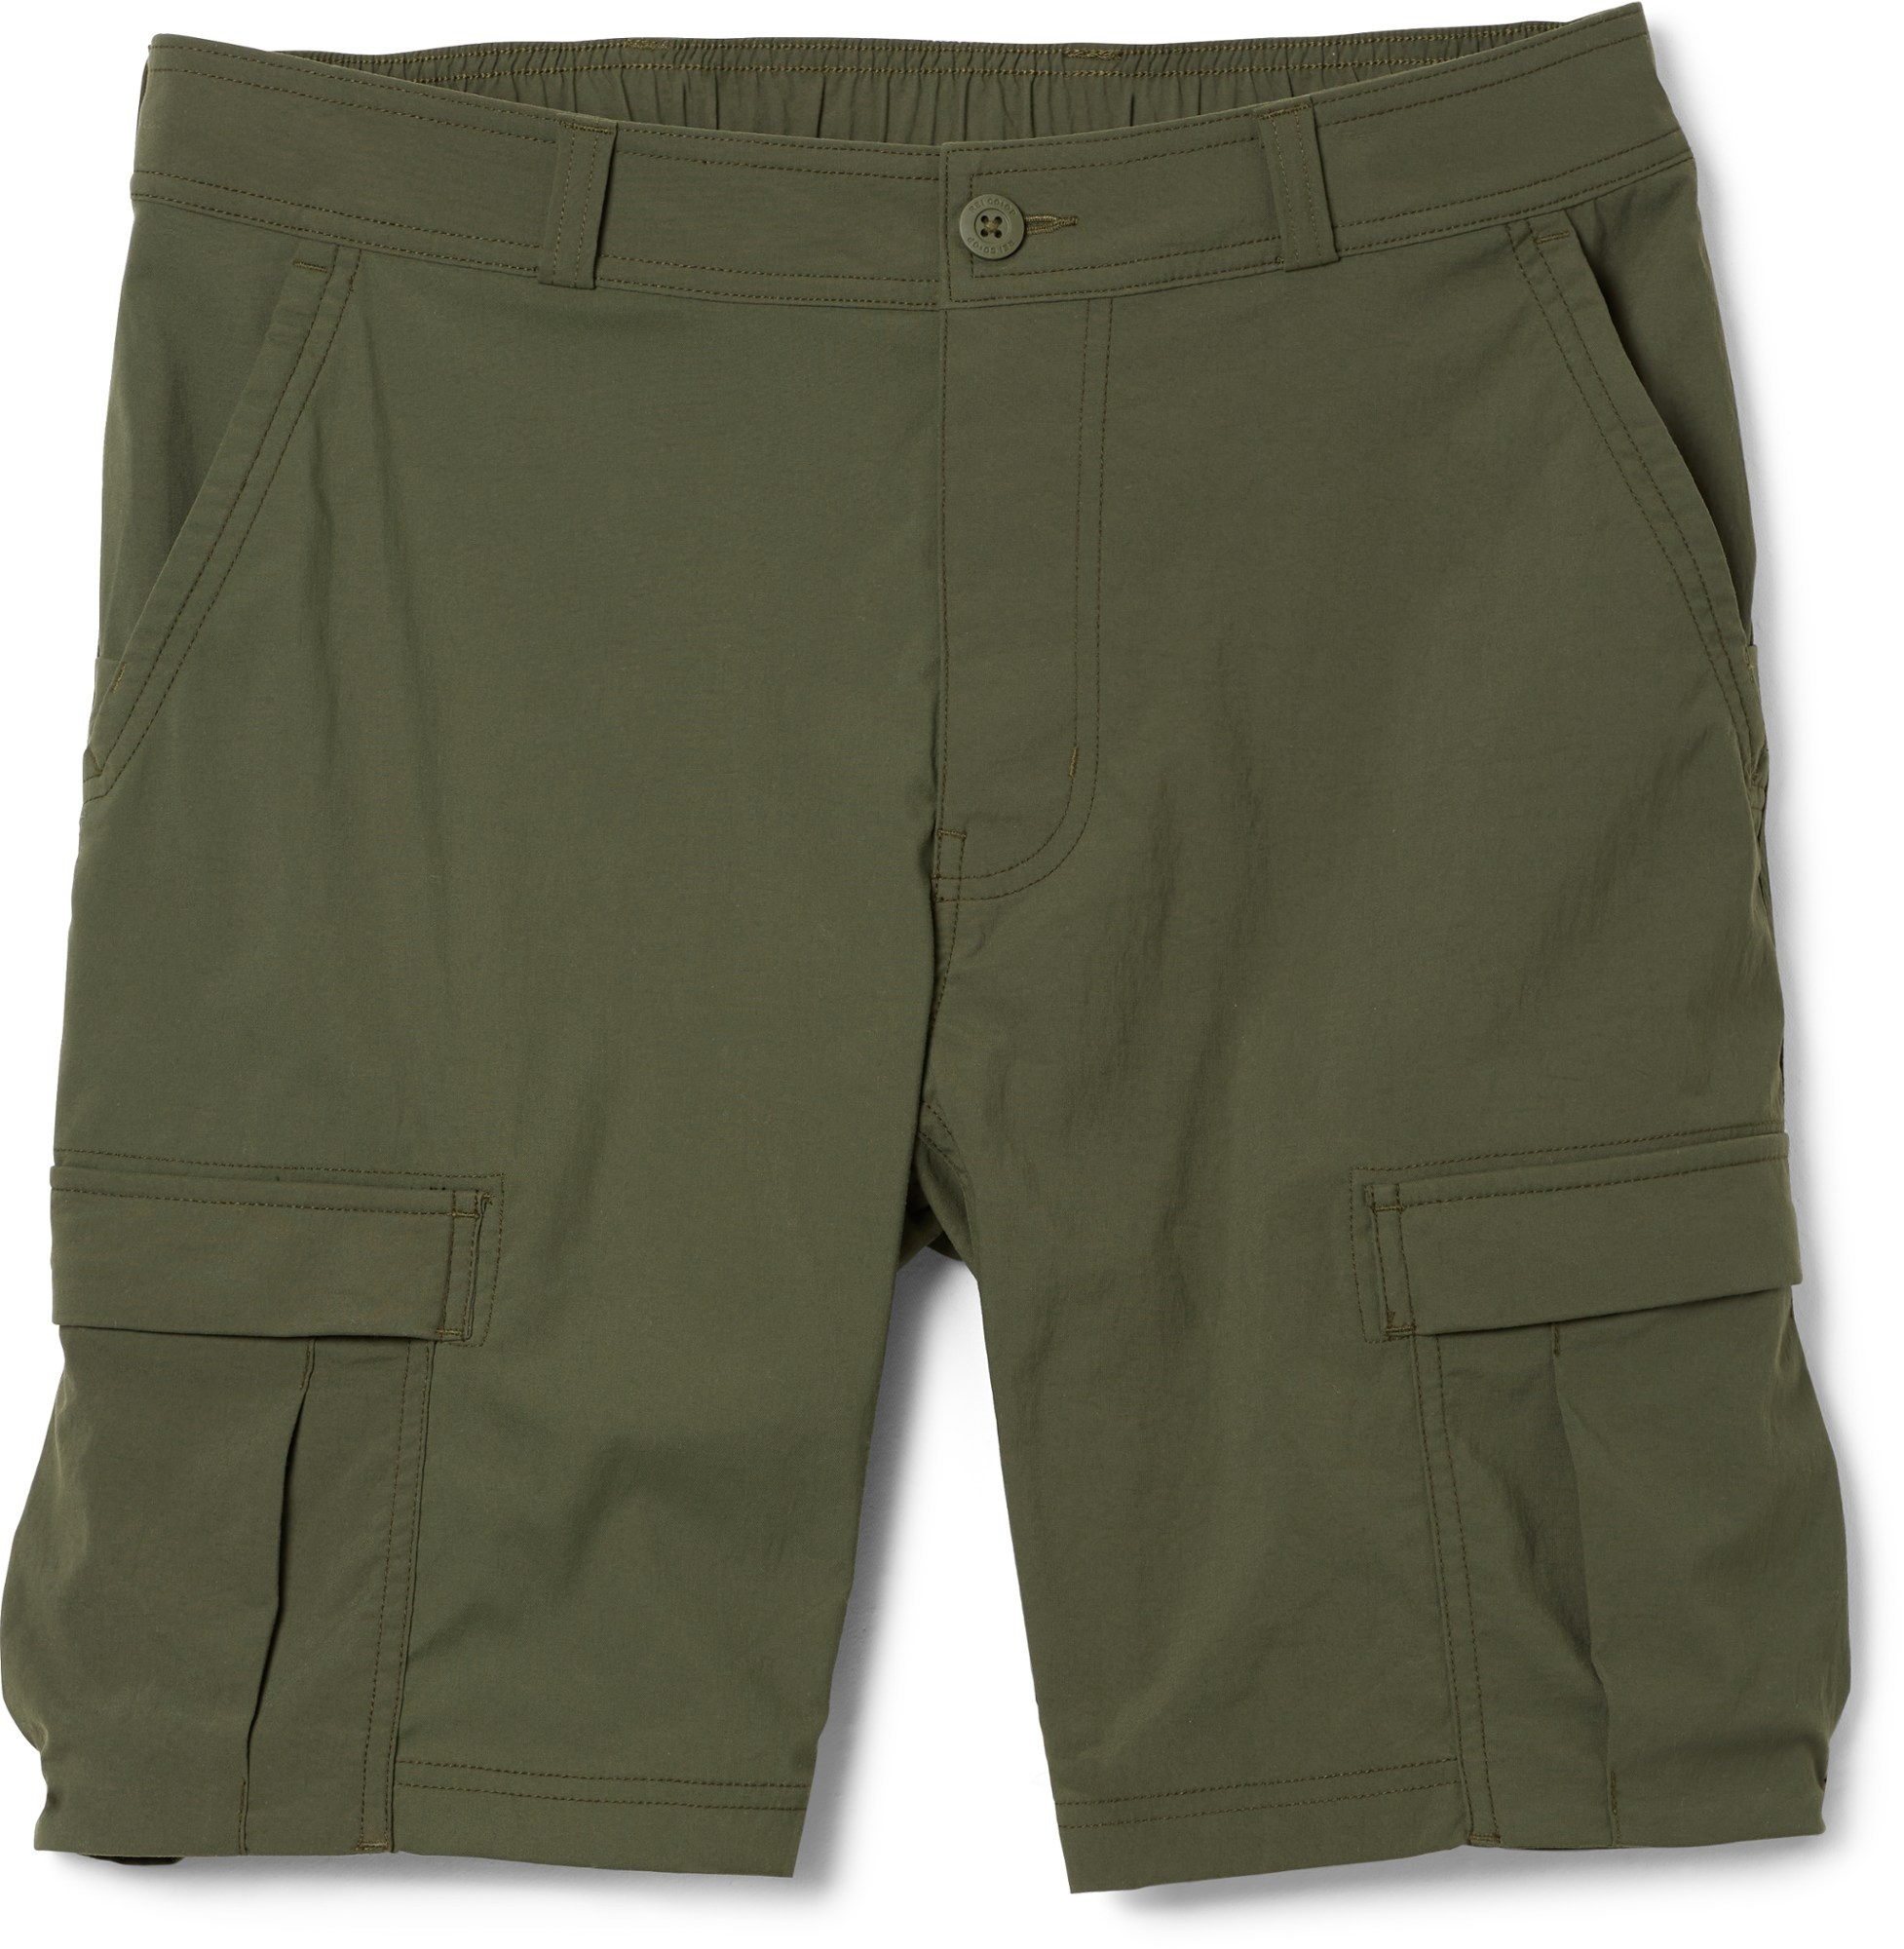 REI Co-op Sahara Cargo Short Review | Tested & Rated